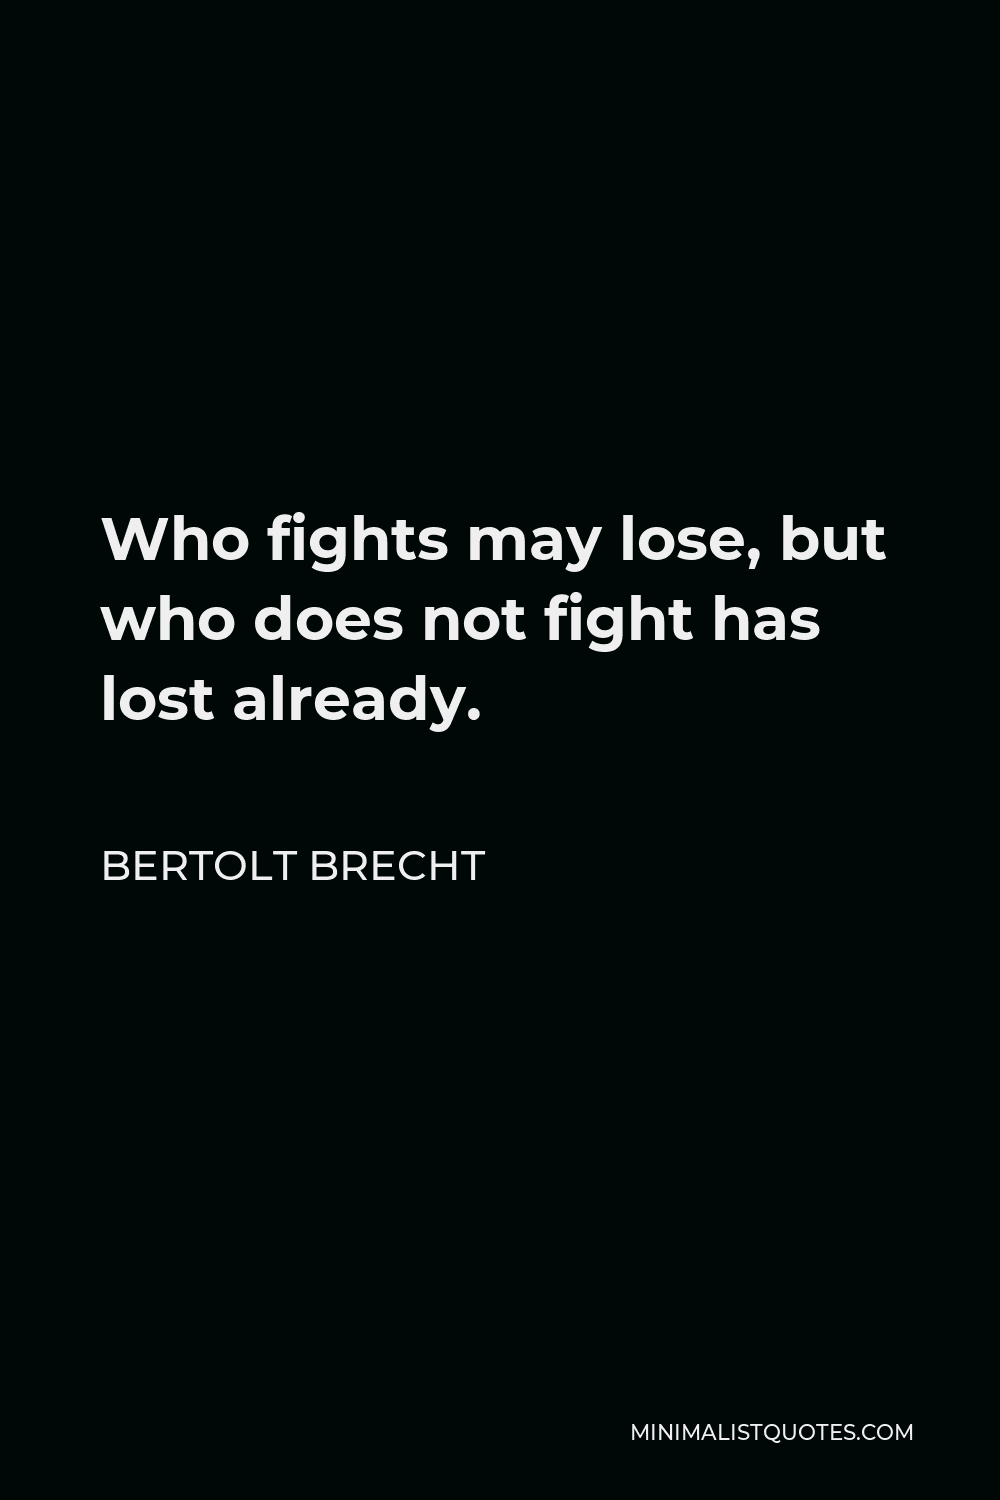 Bertolt Brecht Quote - Who fights may lose, but who does not fight has lost already.